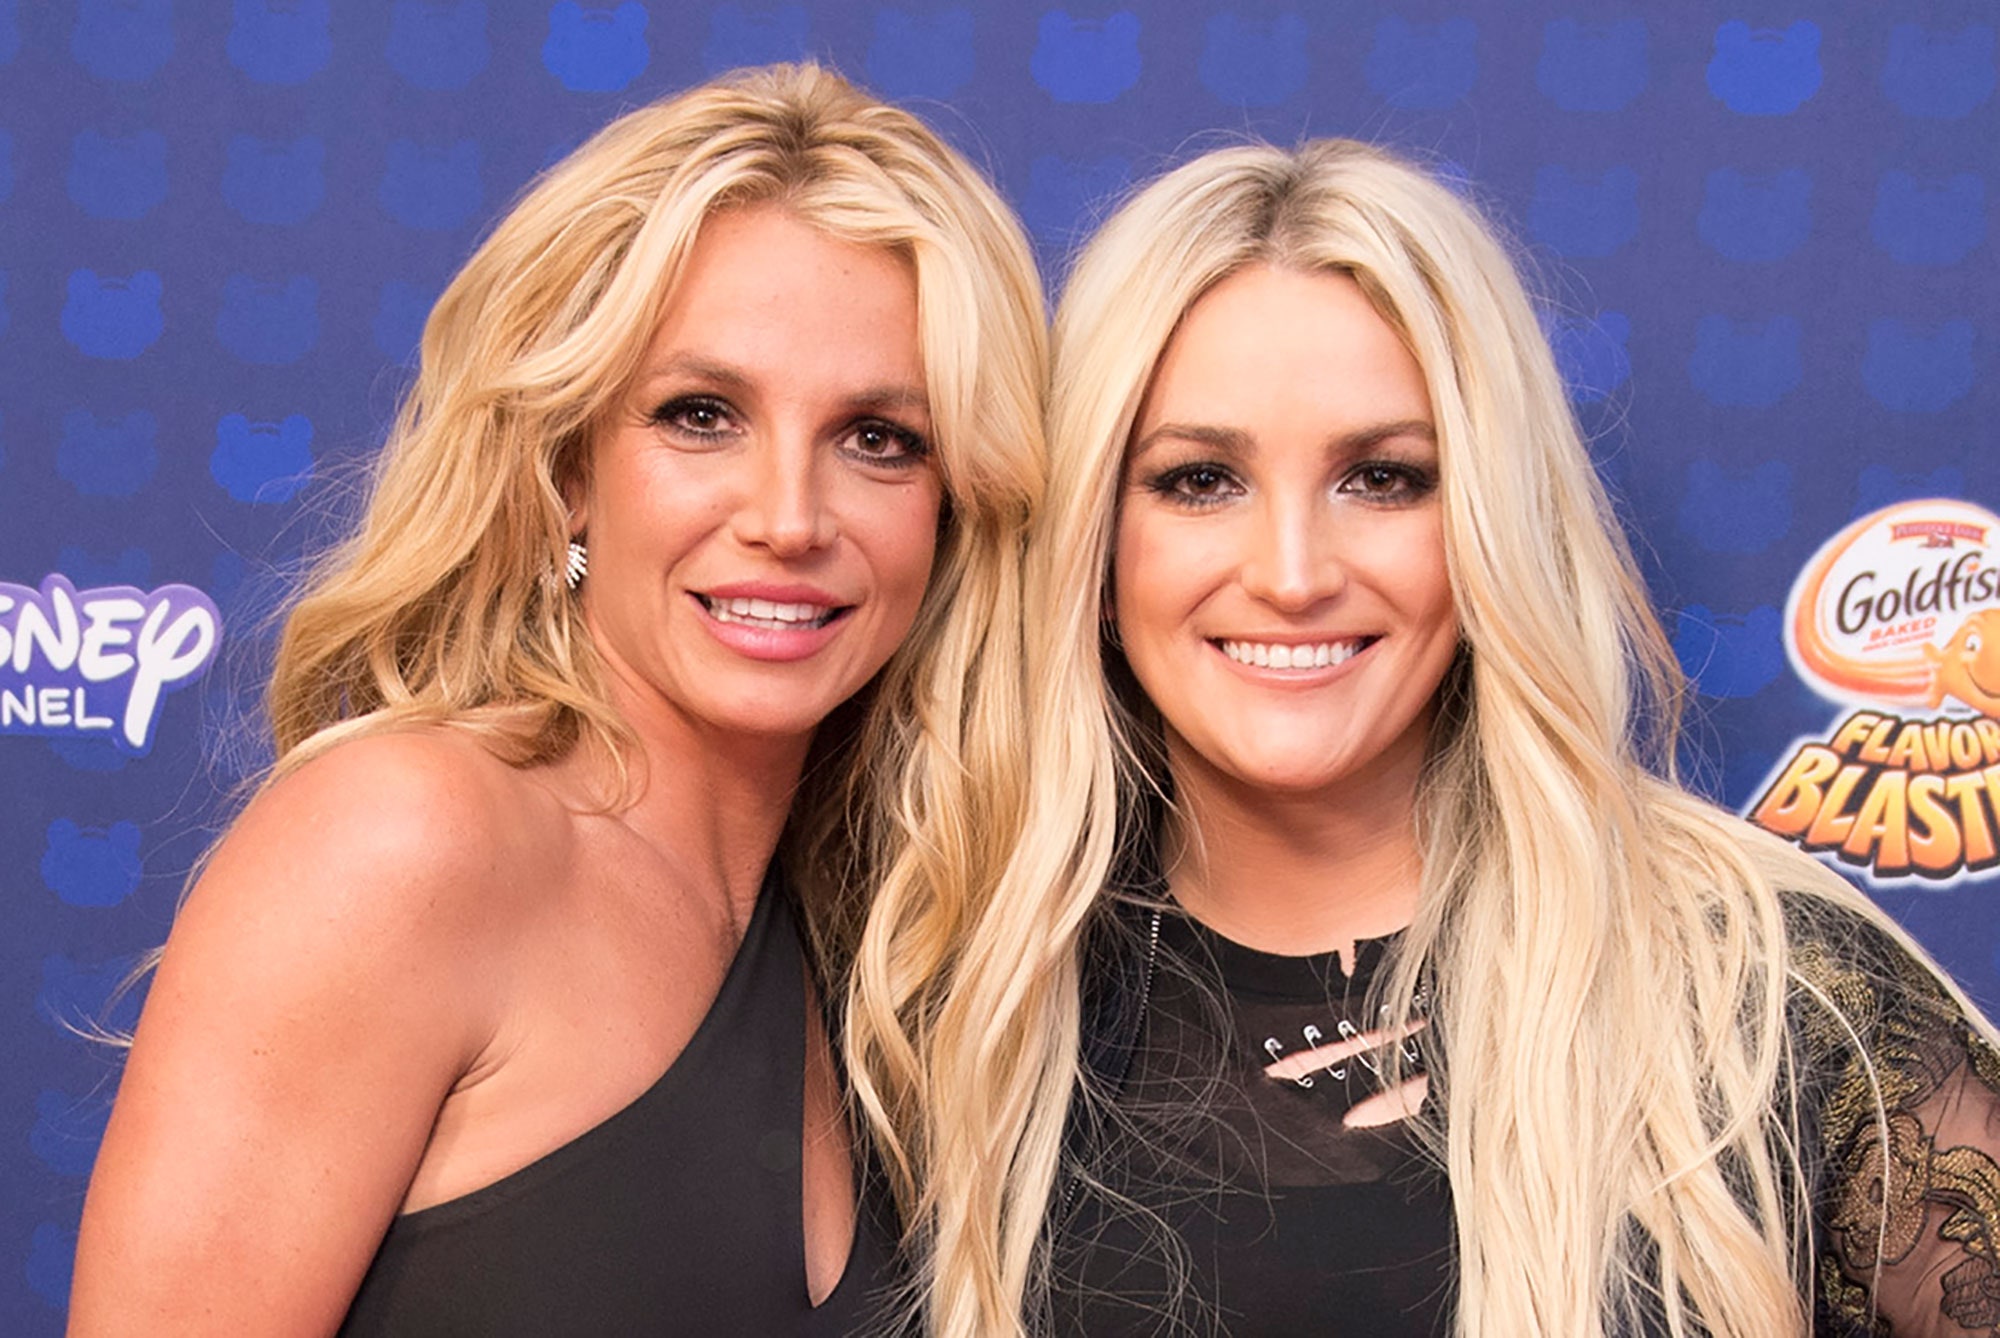 Jamie Lynn Spears and Britney spears relationship, age difference, and feud timeline